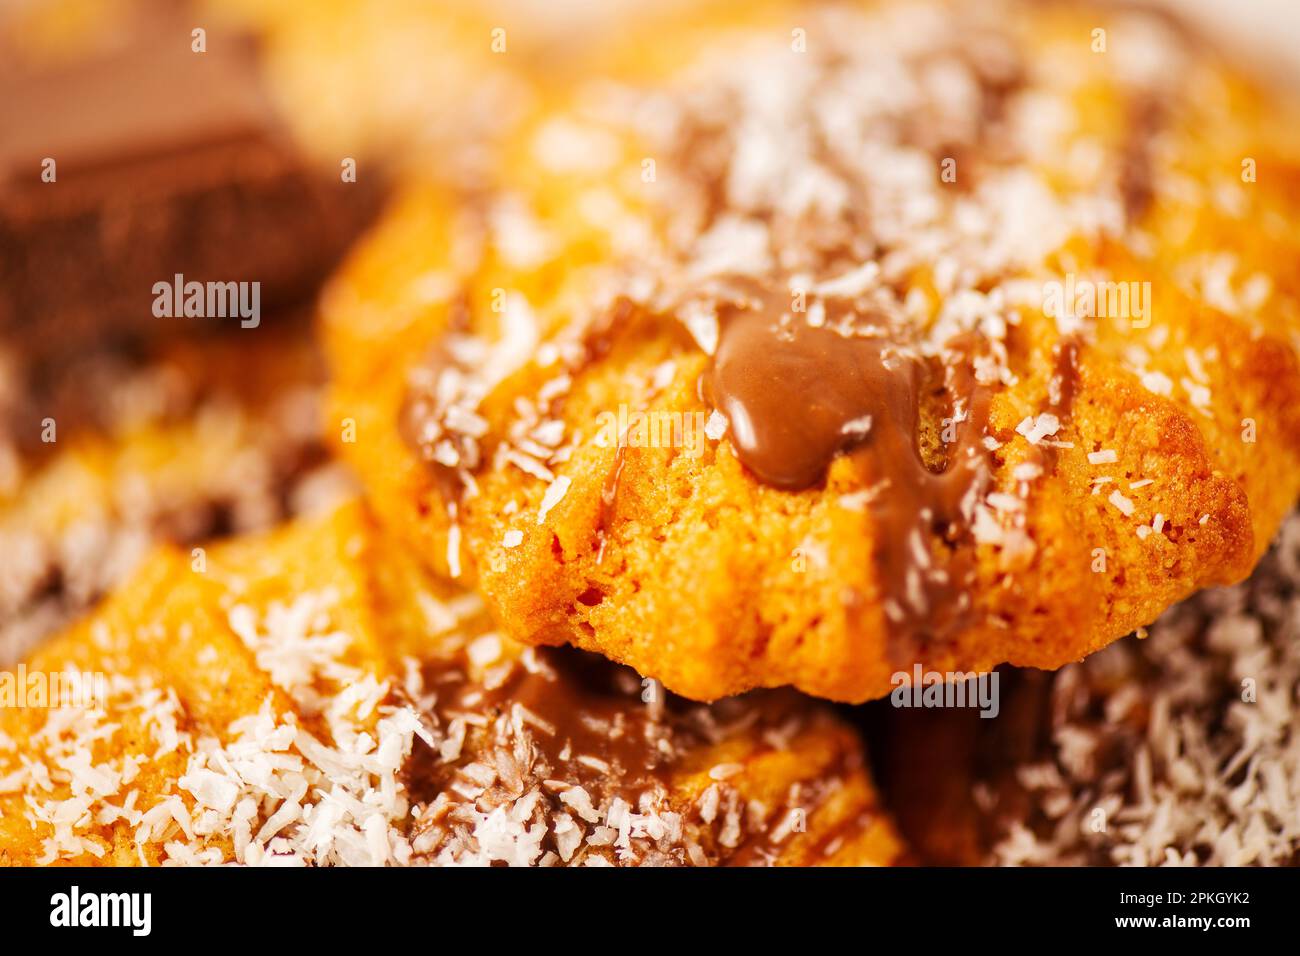 Fresh-baked Snickerdoodle cookies with chocolate and shredded coconut. Stock Photo